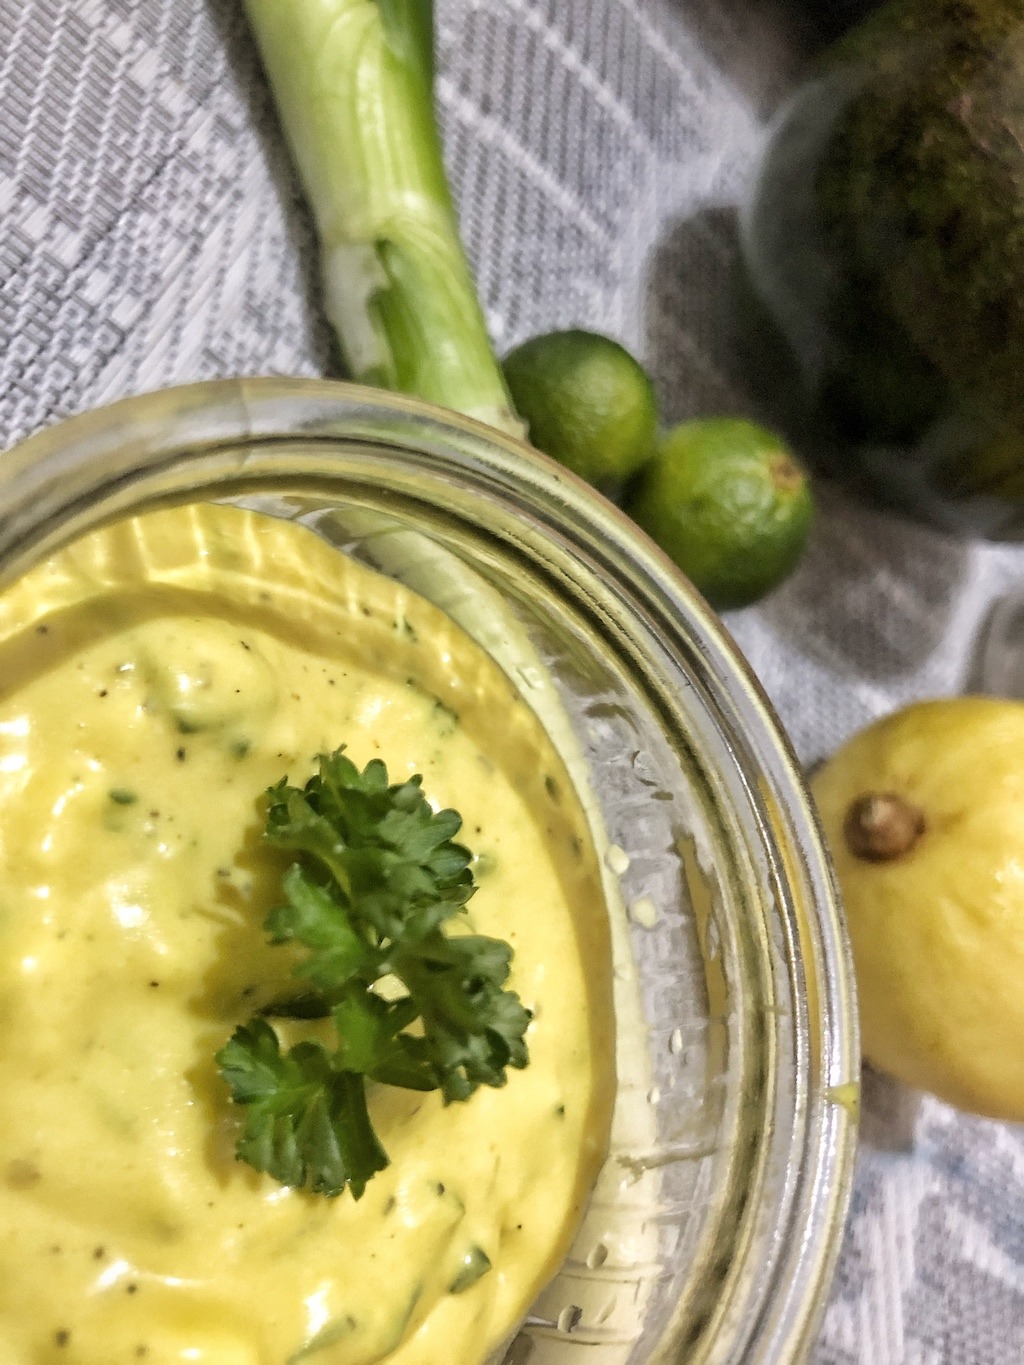 Easy Creamy Mustard BBQ Sauce For Fish Beef Or Chicken - Healthy Keto Sugar Free Low Carb Recipe